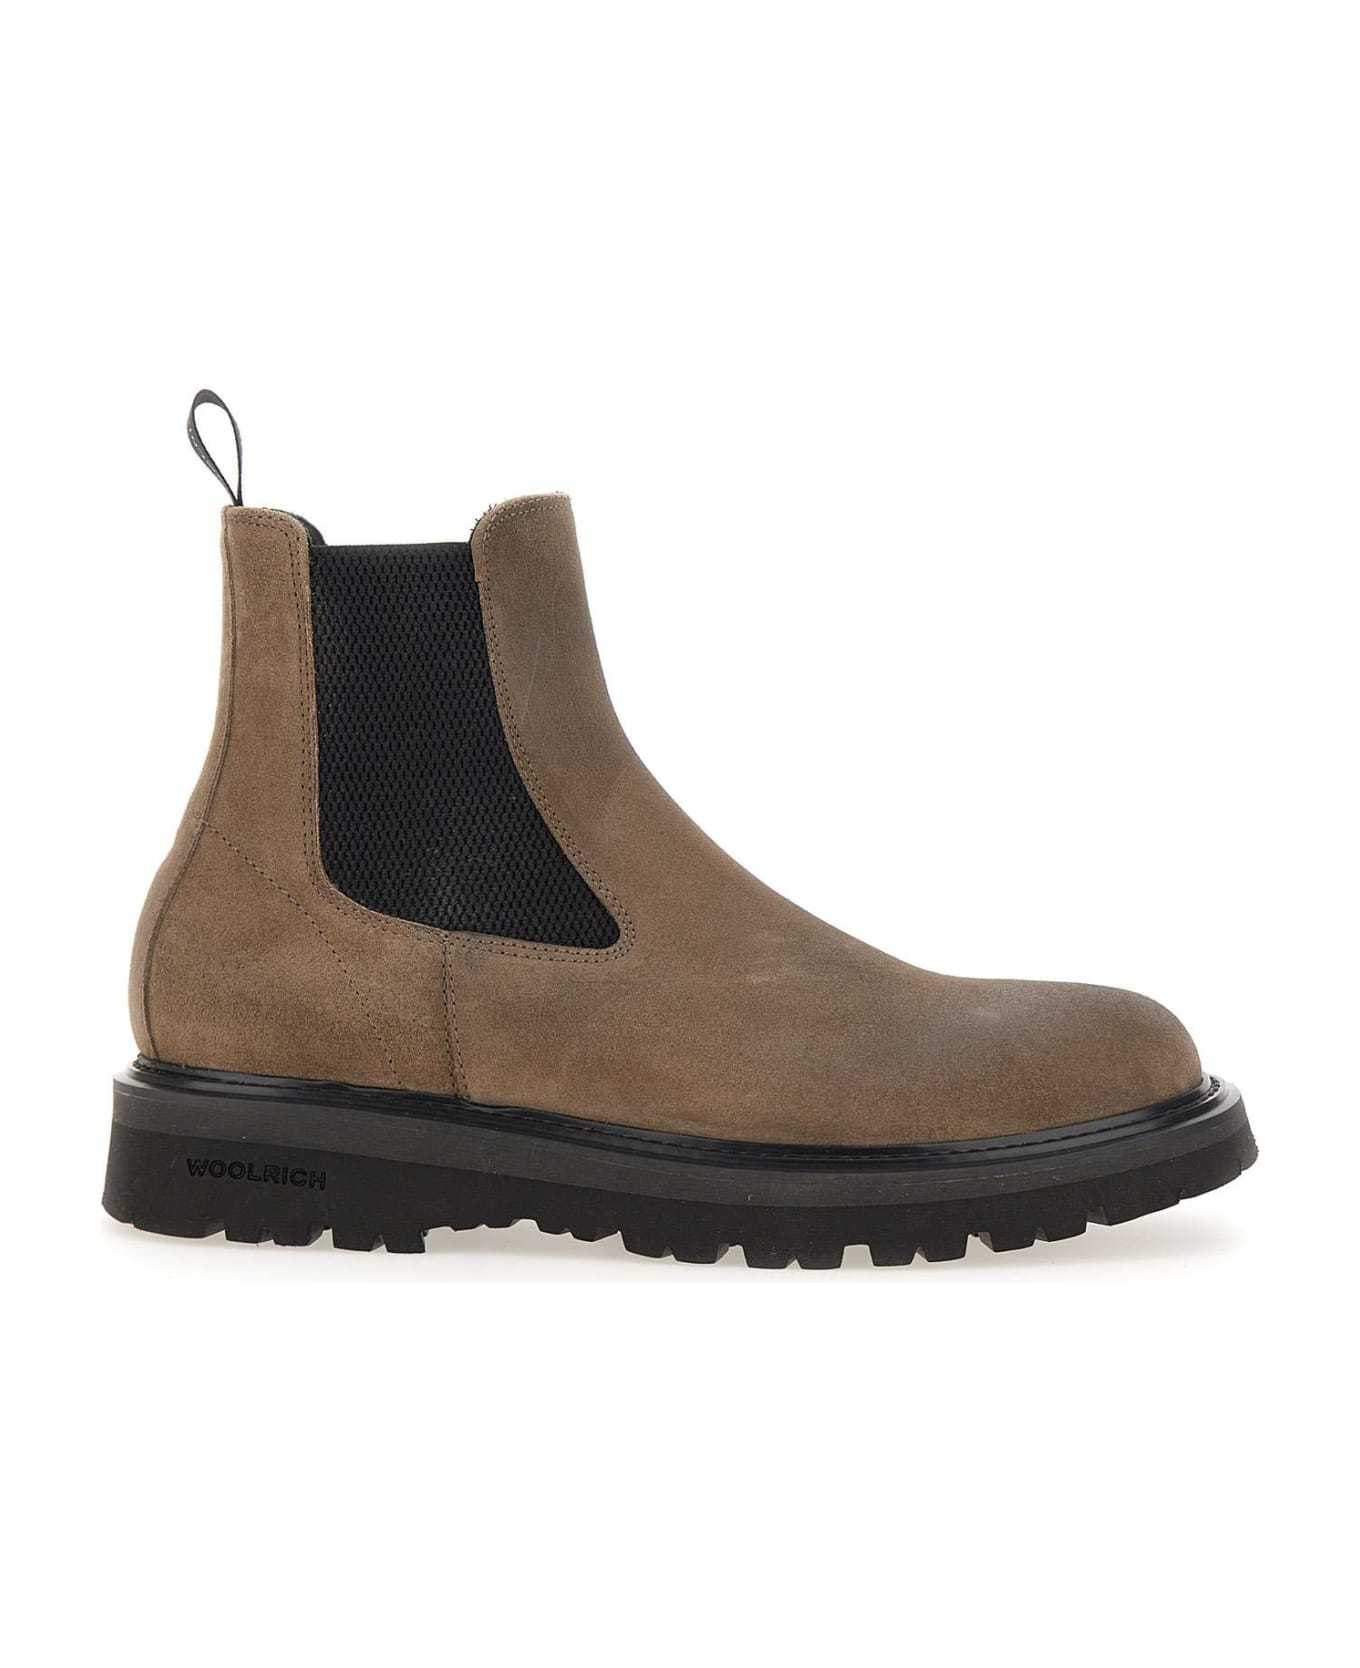 Woolrich 'chelsea New City' Leather Boots - Beige ブーツ